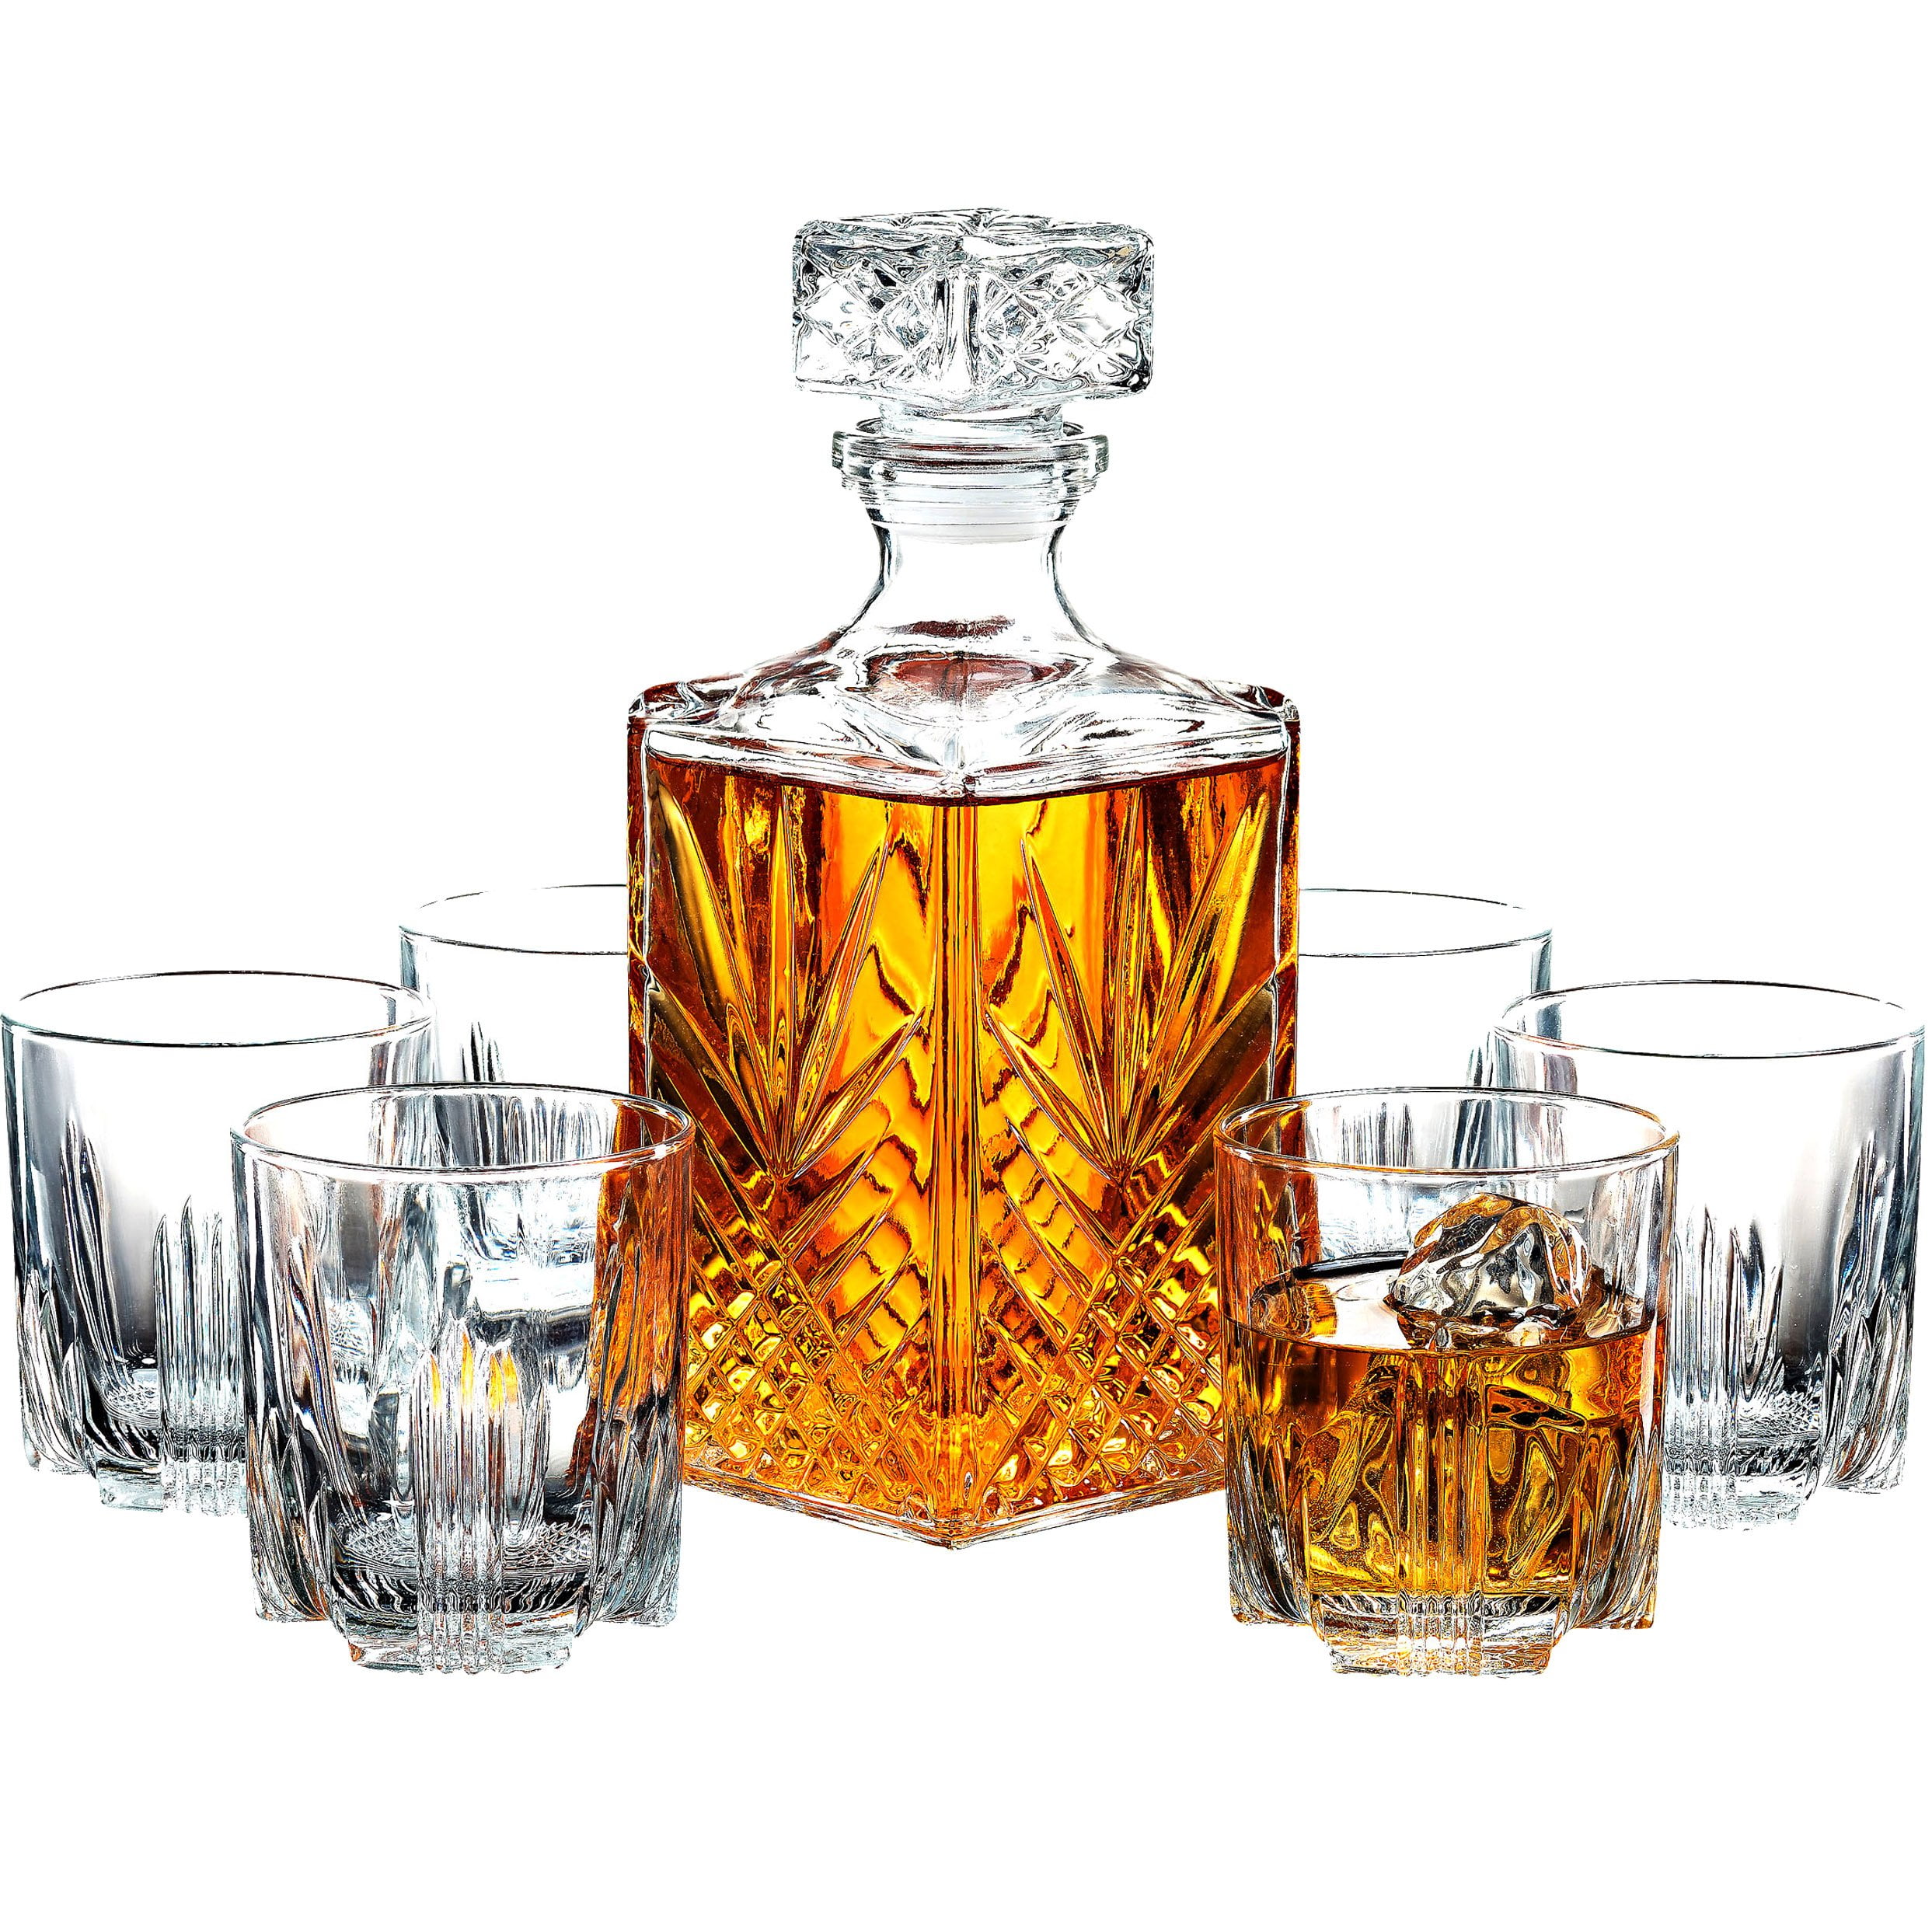 Paksh Novelty 7 Piece Italian Crafted Glass Decanter and Whisky Glasses Set 